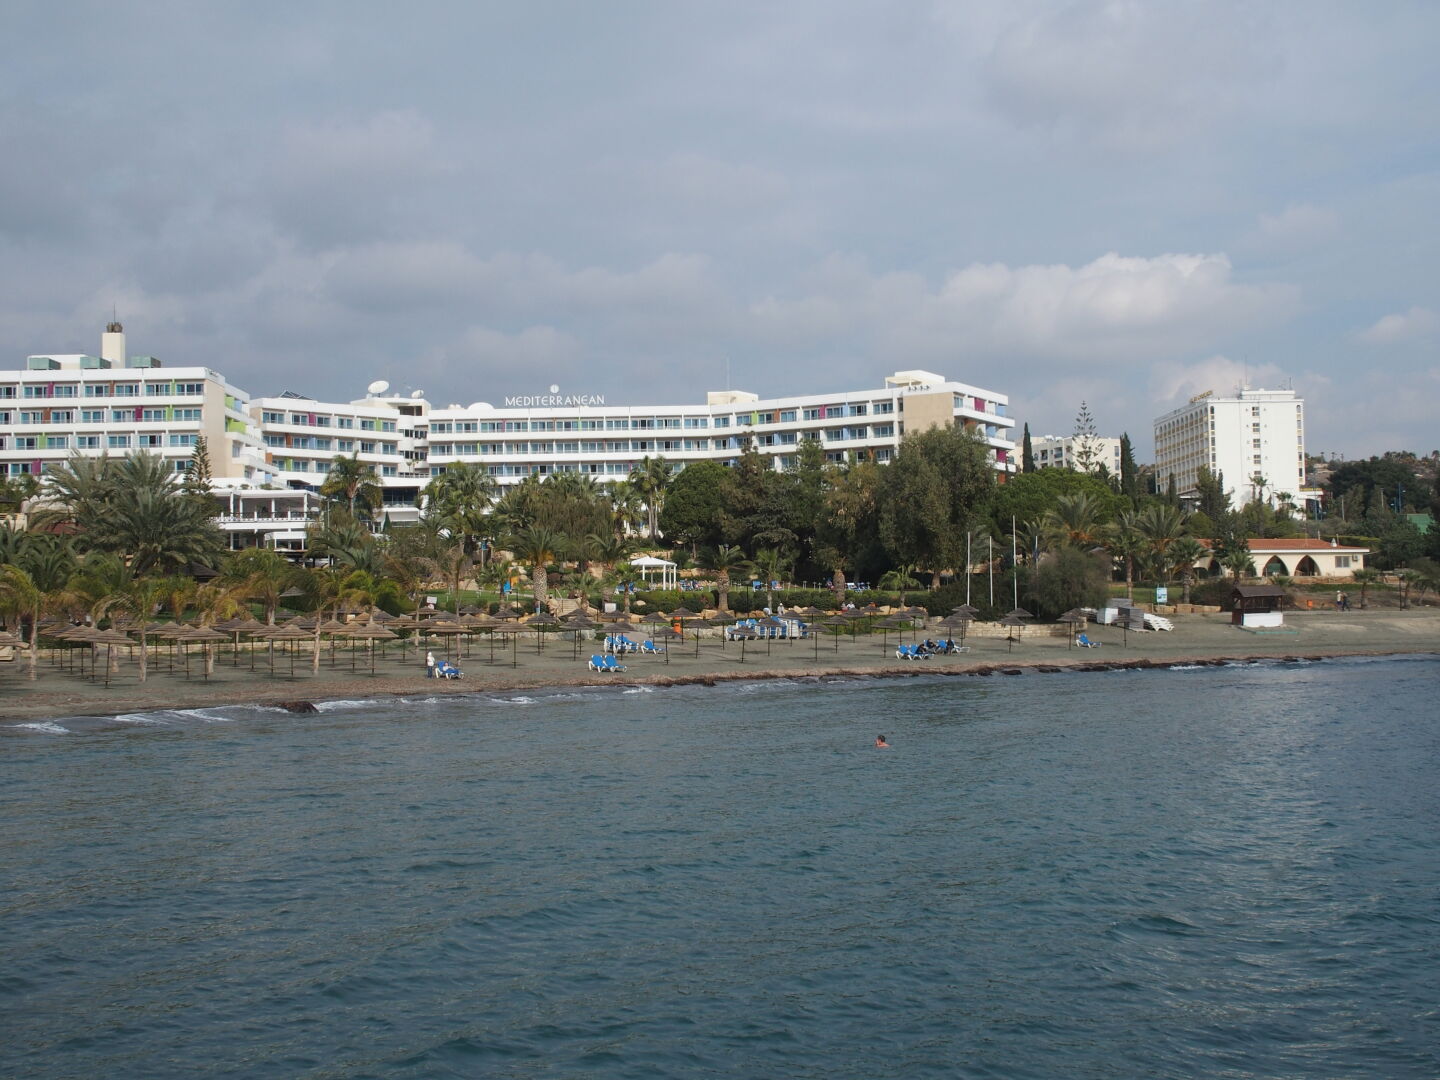 This is our hotel, the Mediterranean Beach Hotel in Limassol, Cyprus.